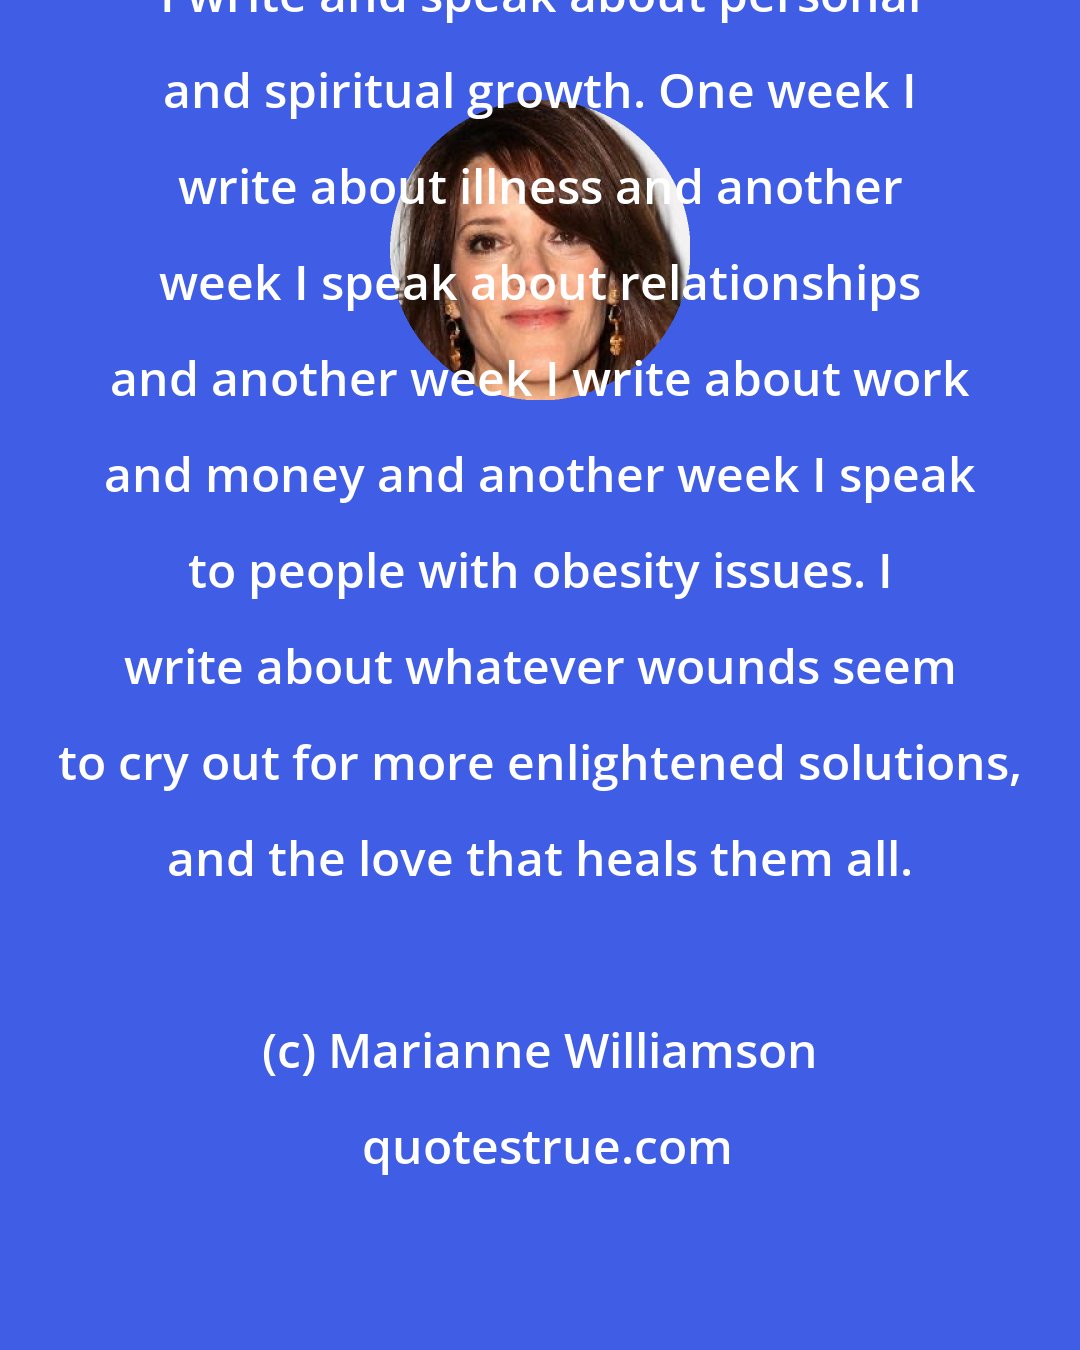 Marianne Williamson: I write and speak about personal and spiritual growth. One week I write about illness and another week I speak about relationships and another week I write about work and money and another week I speak to people with obesity issues. I write about whatever wounds seem to cry out for more enlightened solutions, and the love that heals them all.